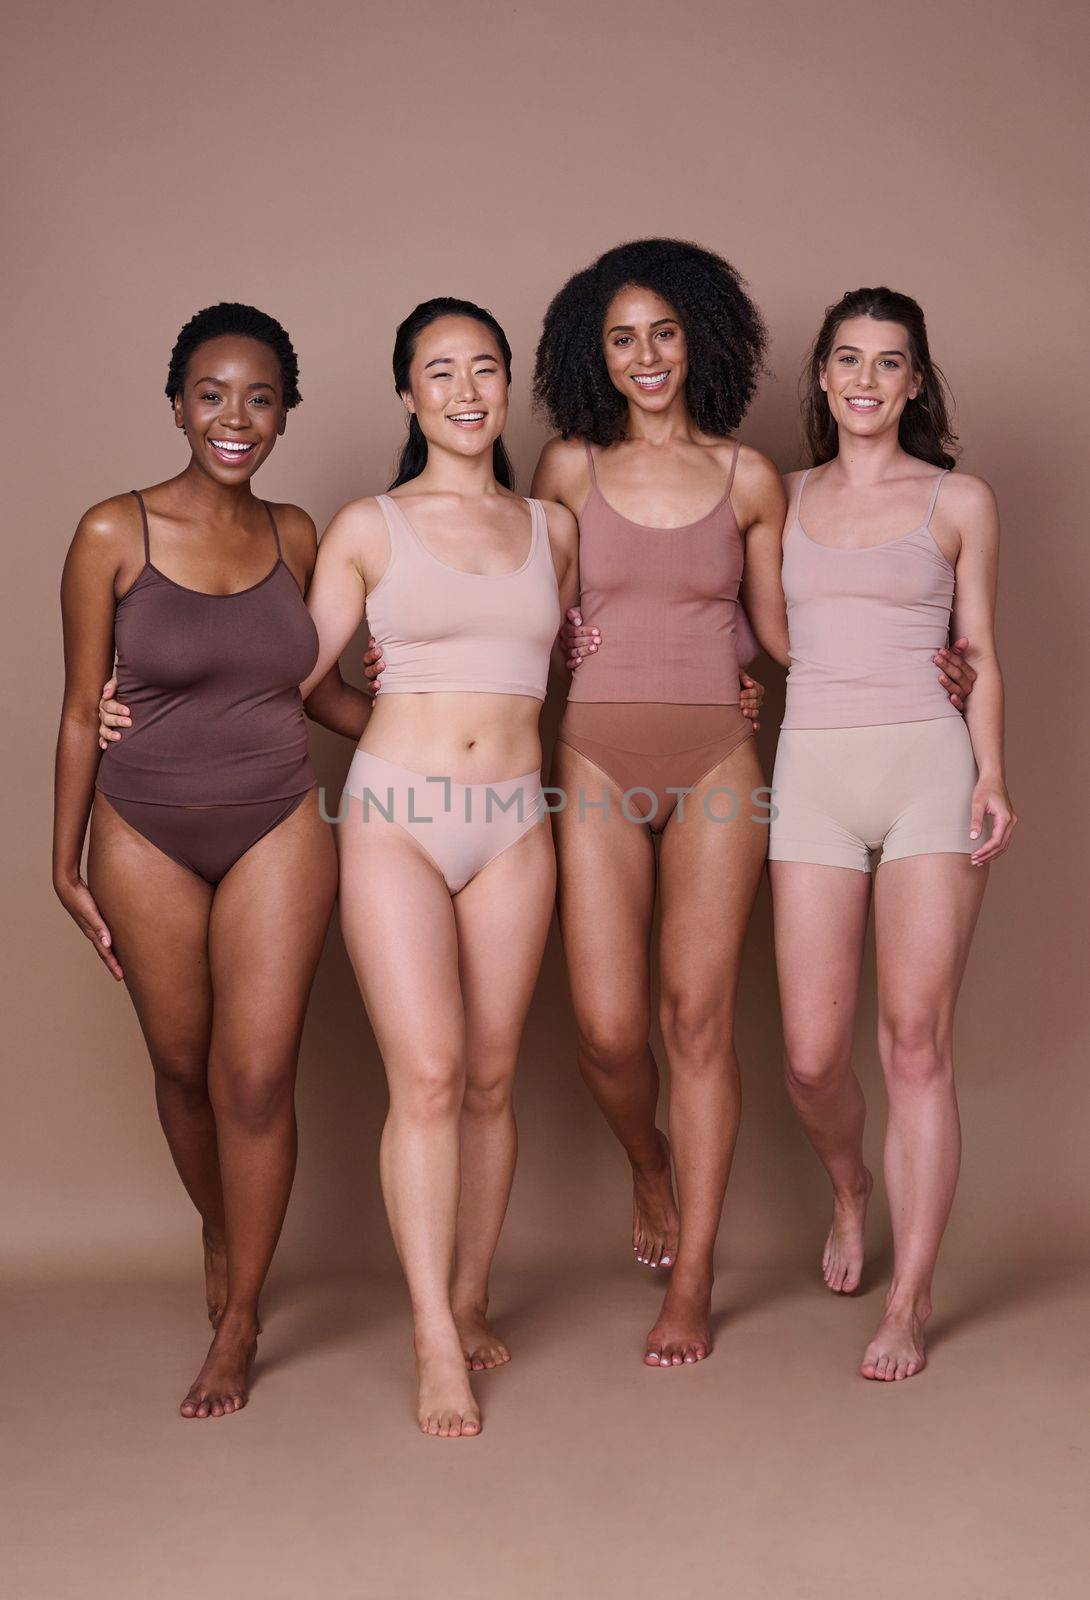 Body, diversity and beauty with women and inclusion, happy portrait and skin with fitness, body care and health. Wellness, healthy with body positivity and pride in different shape and size. by YuriArcurs